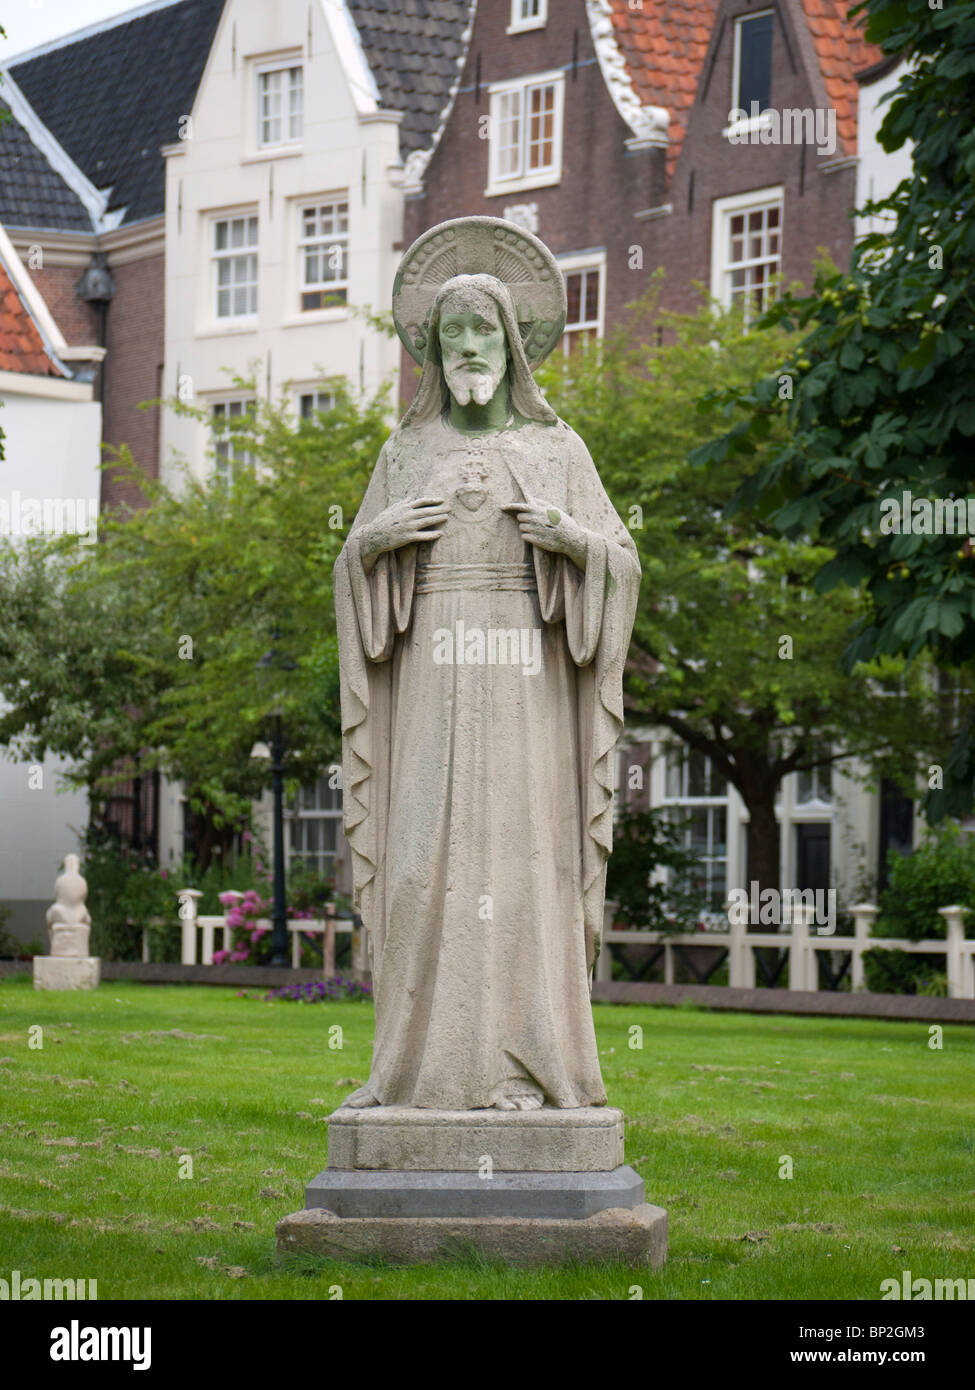 Statue in courtyard at the ancient Begijnhof n Amsterdam, The Netherlands Stock Photo